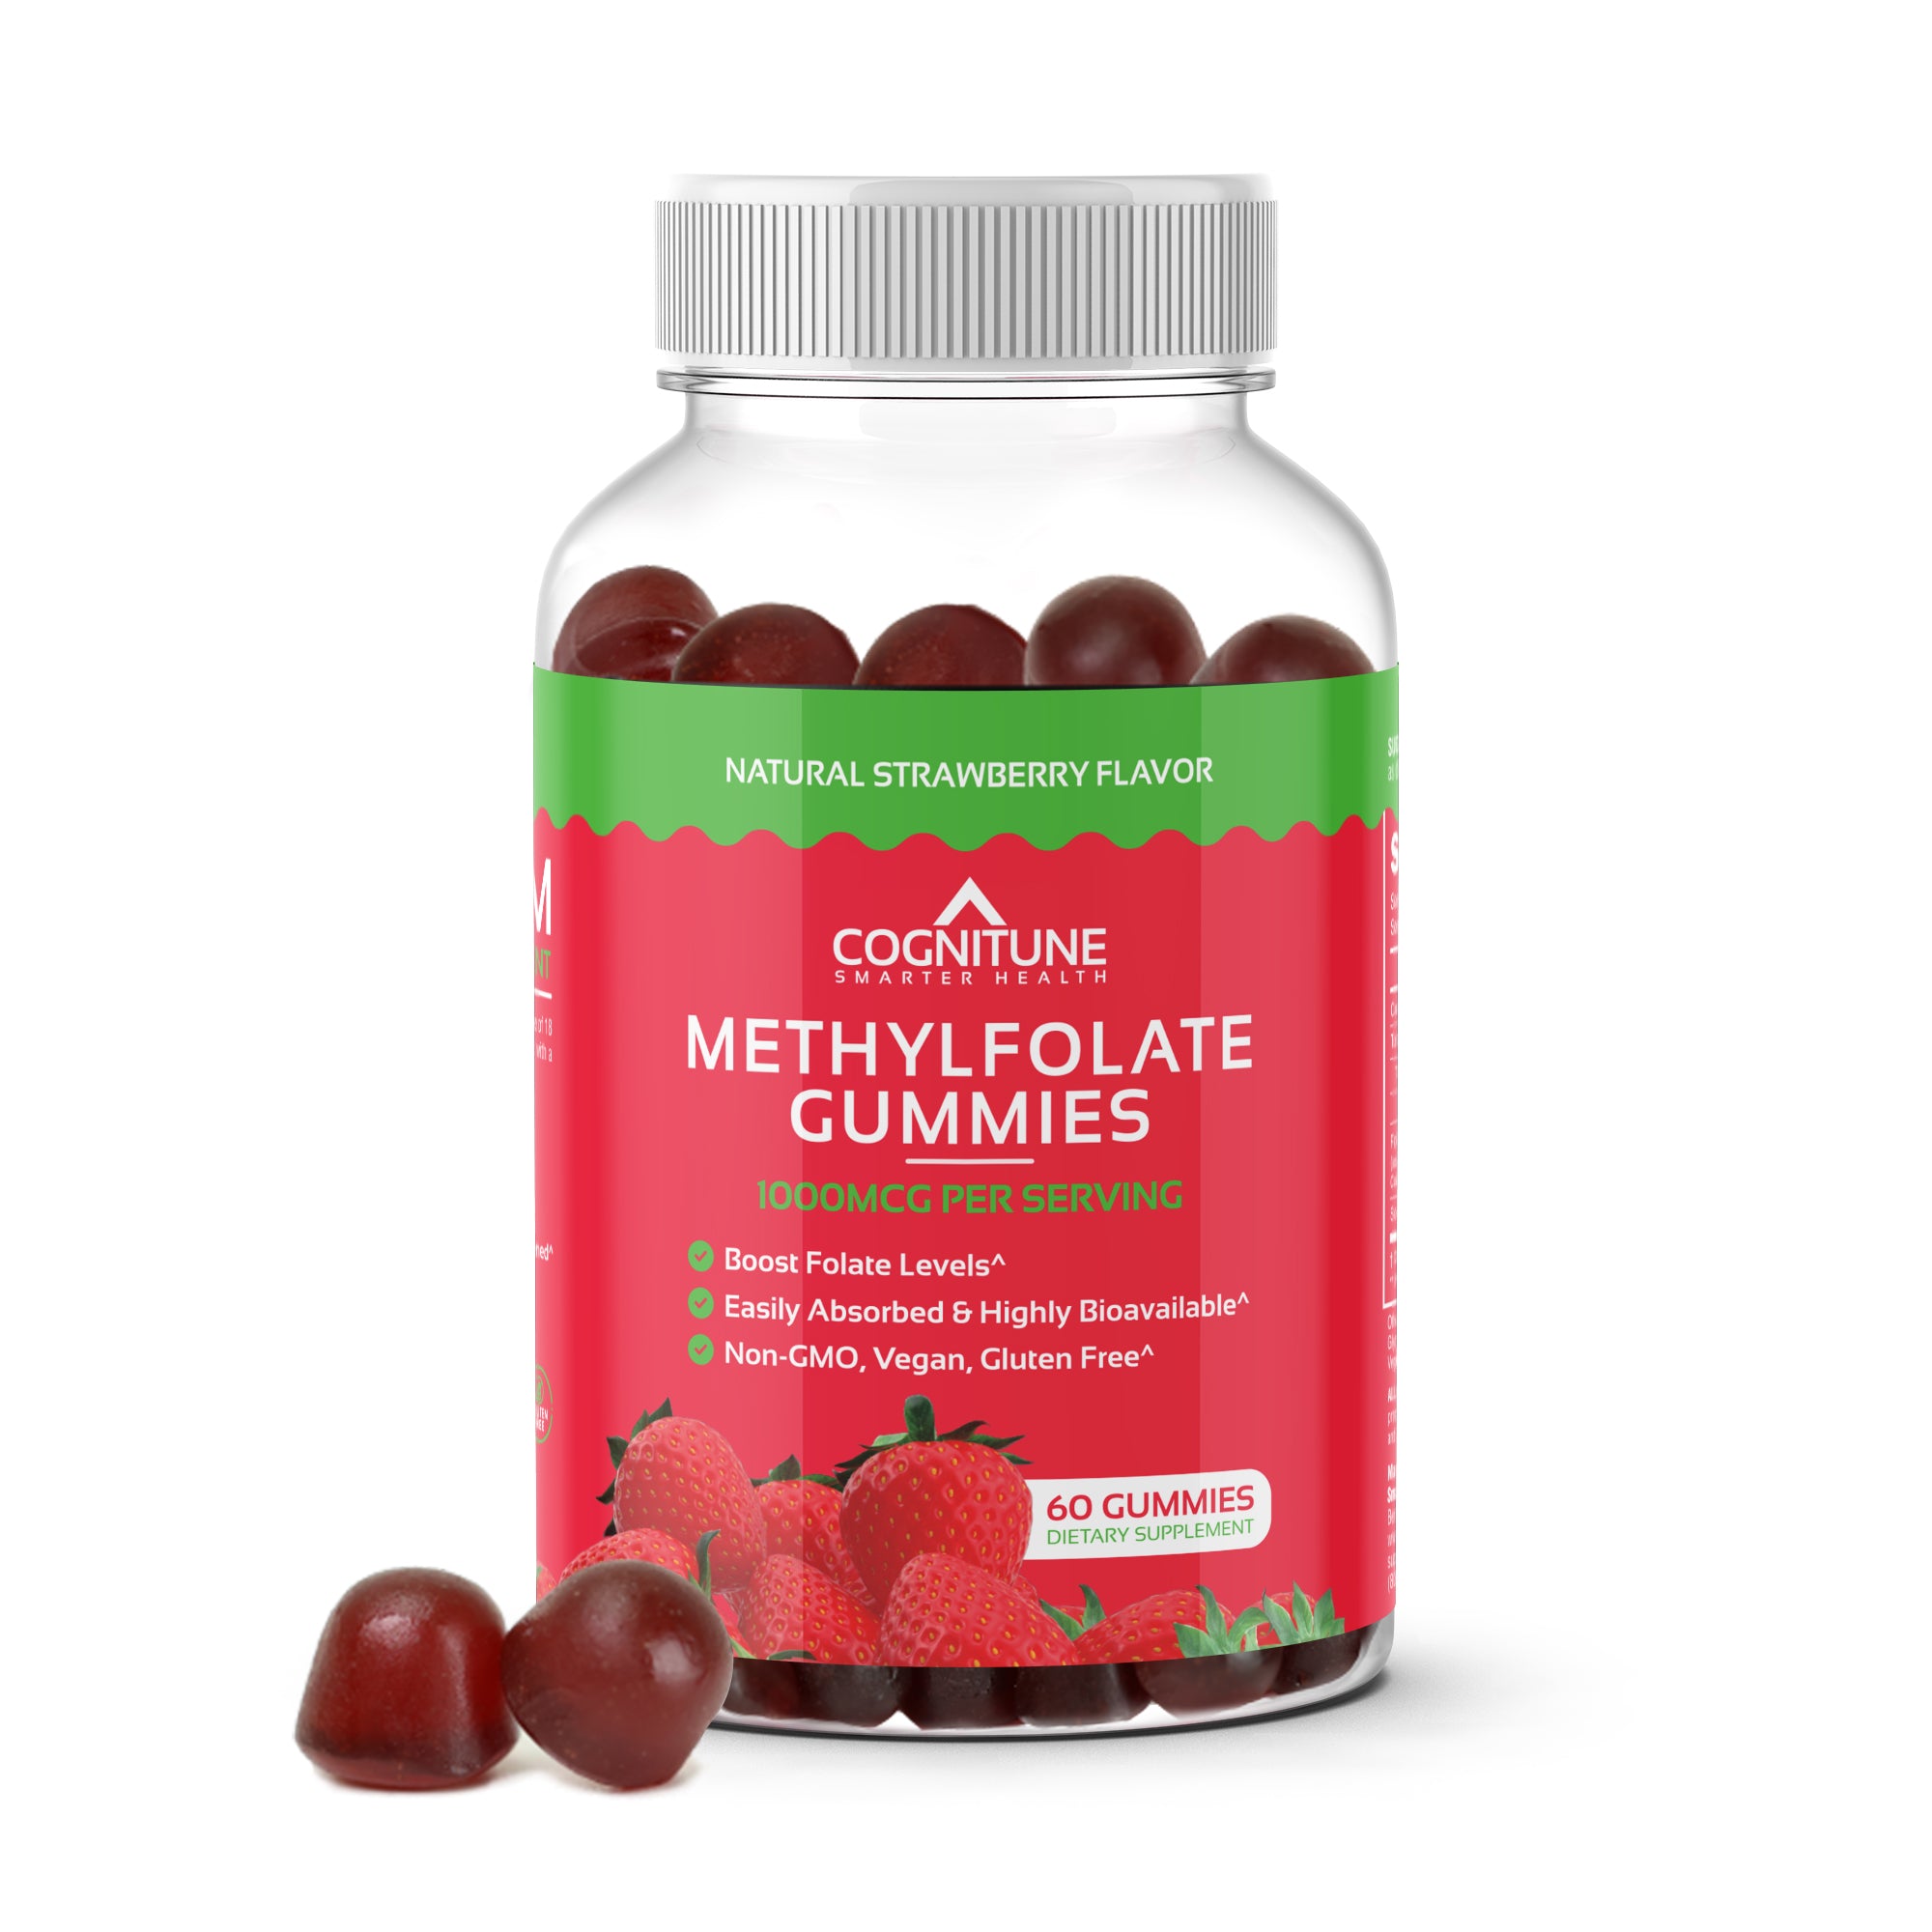 Methylfolate Gummies - Easy to Take High Potency L-Methylfolate Supplement, Strawberry Flavor, Non-GMO, Vegan, Gluten-Free, 60 Count